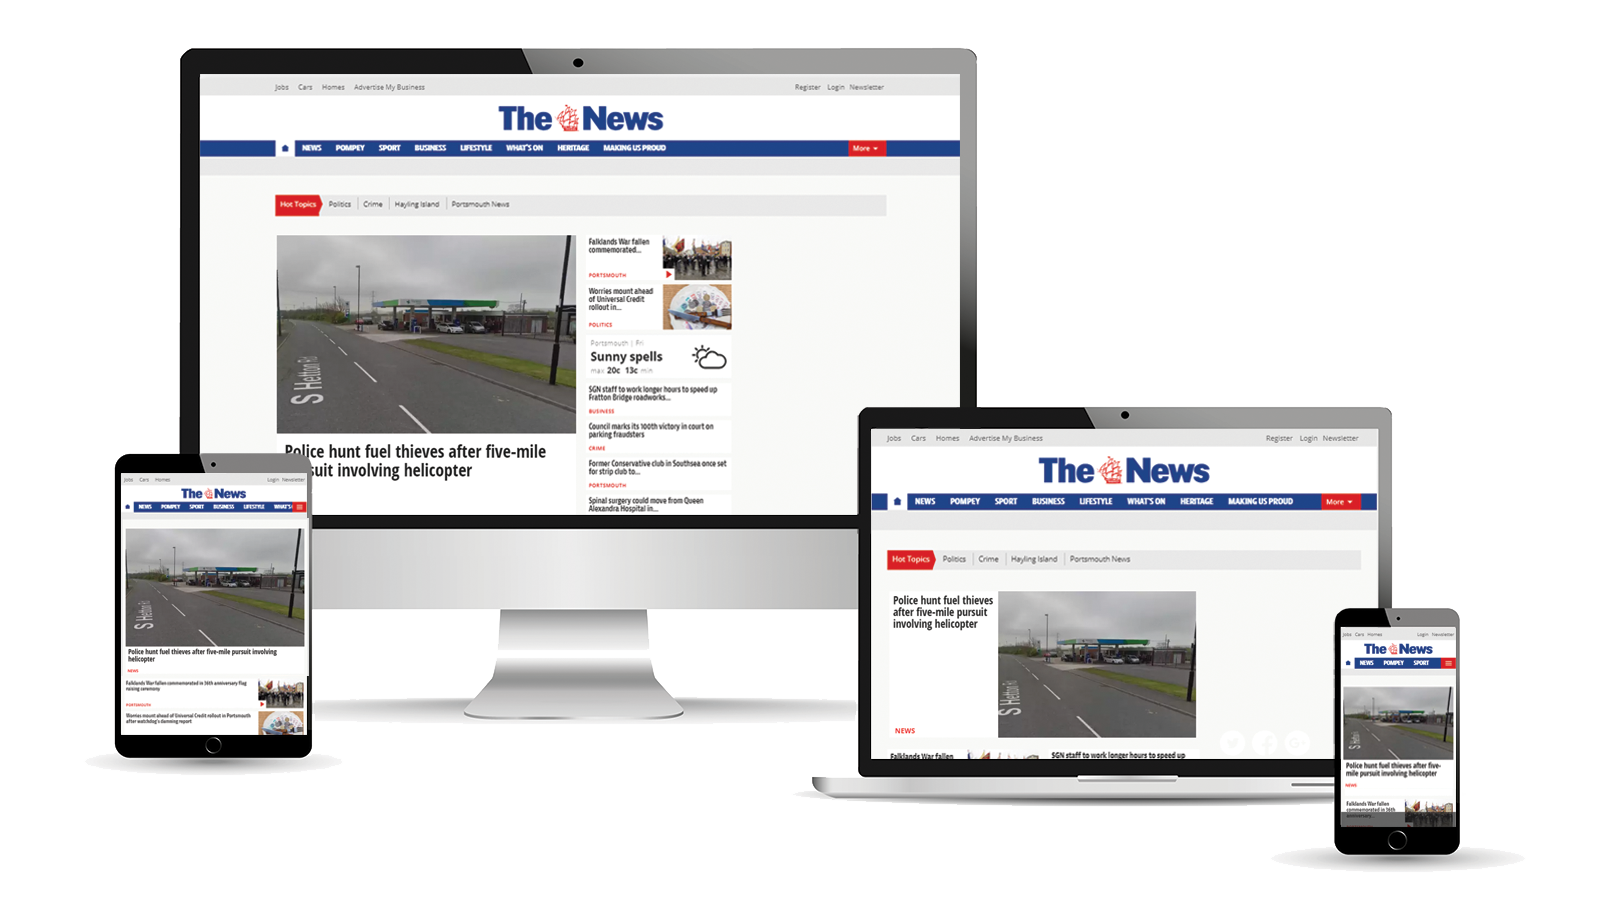 Advertise across desktop, tablet and mobile with The News